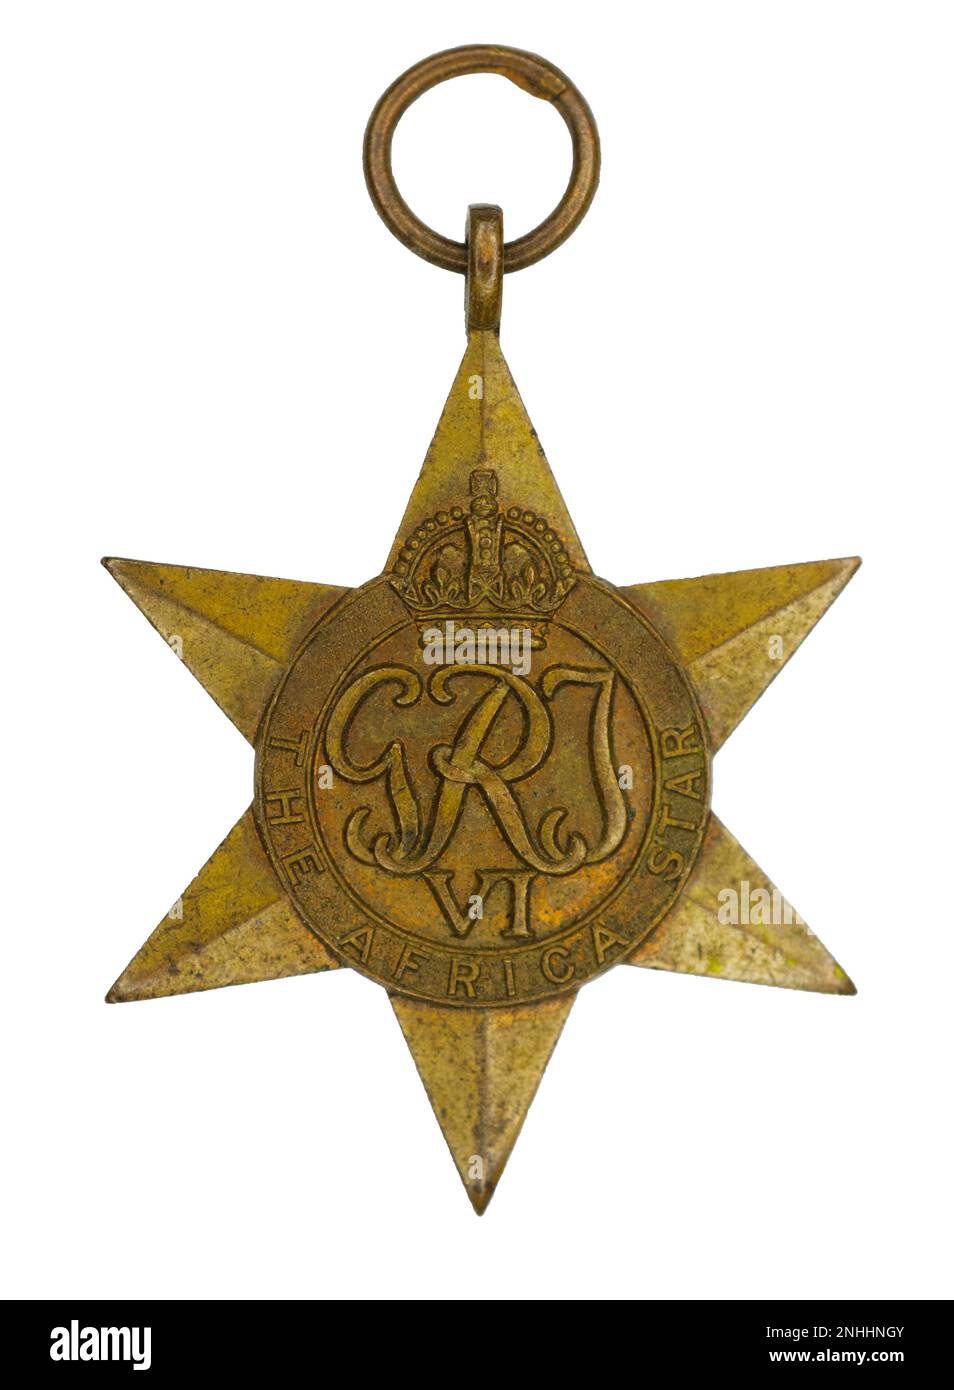 A British Second World War campaign medal, The Africa Star. Stock Photo